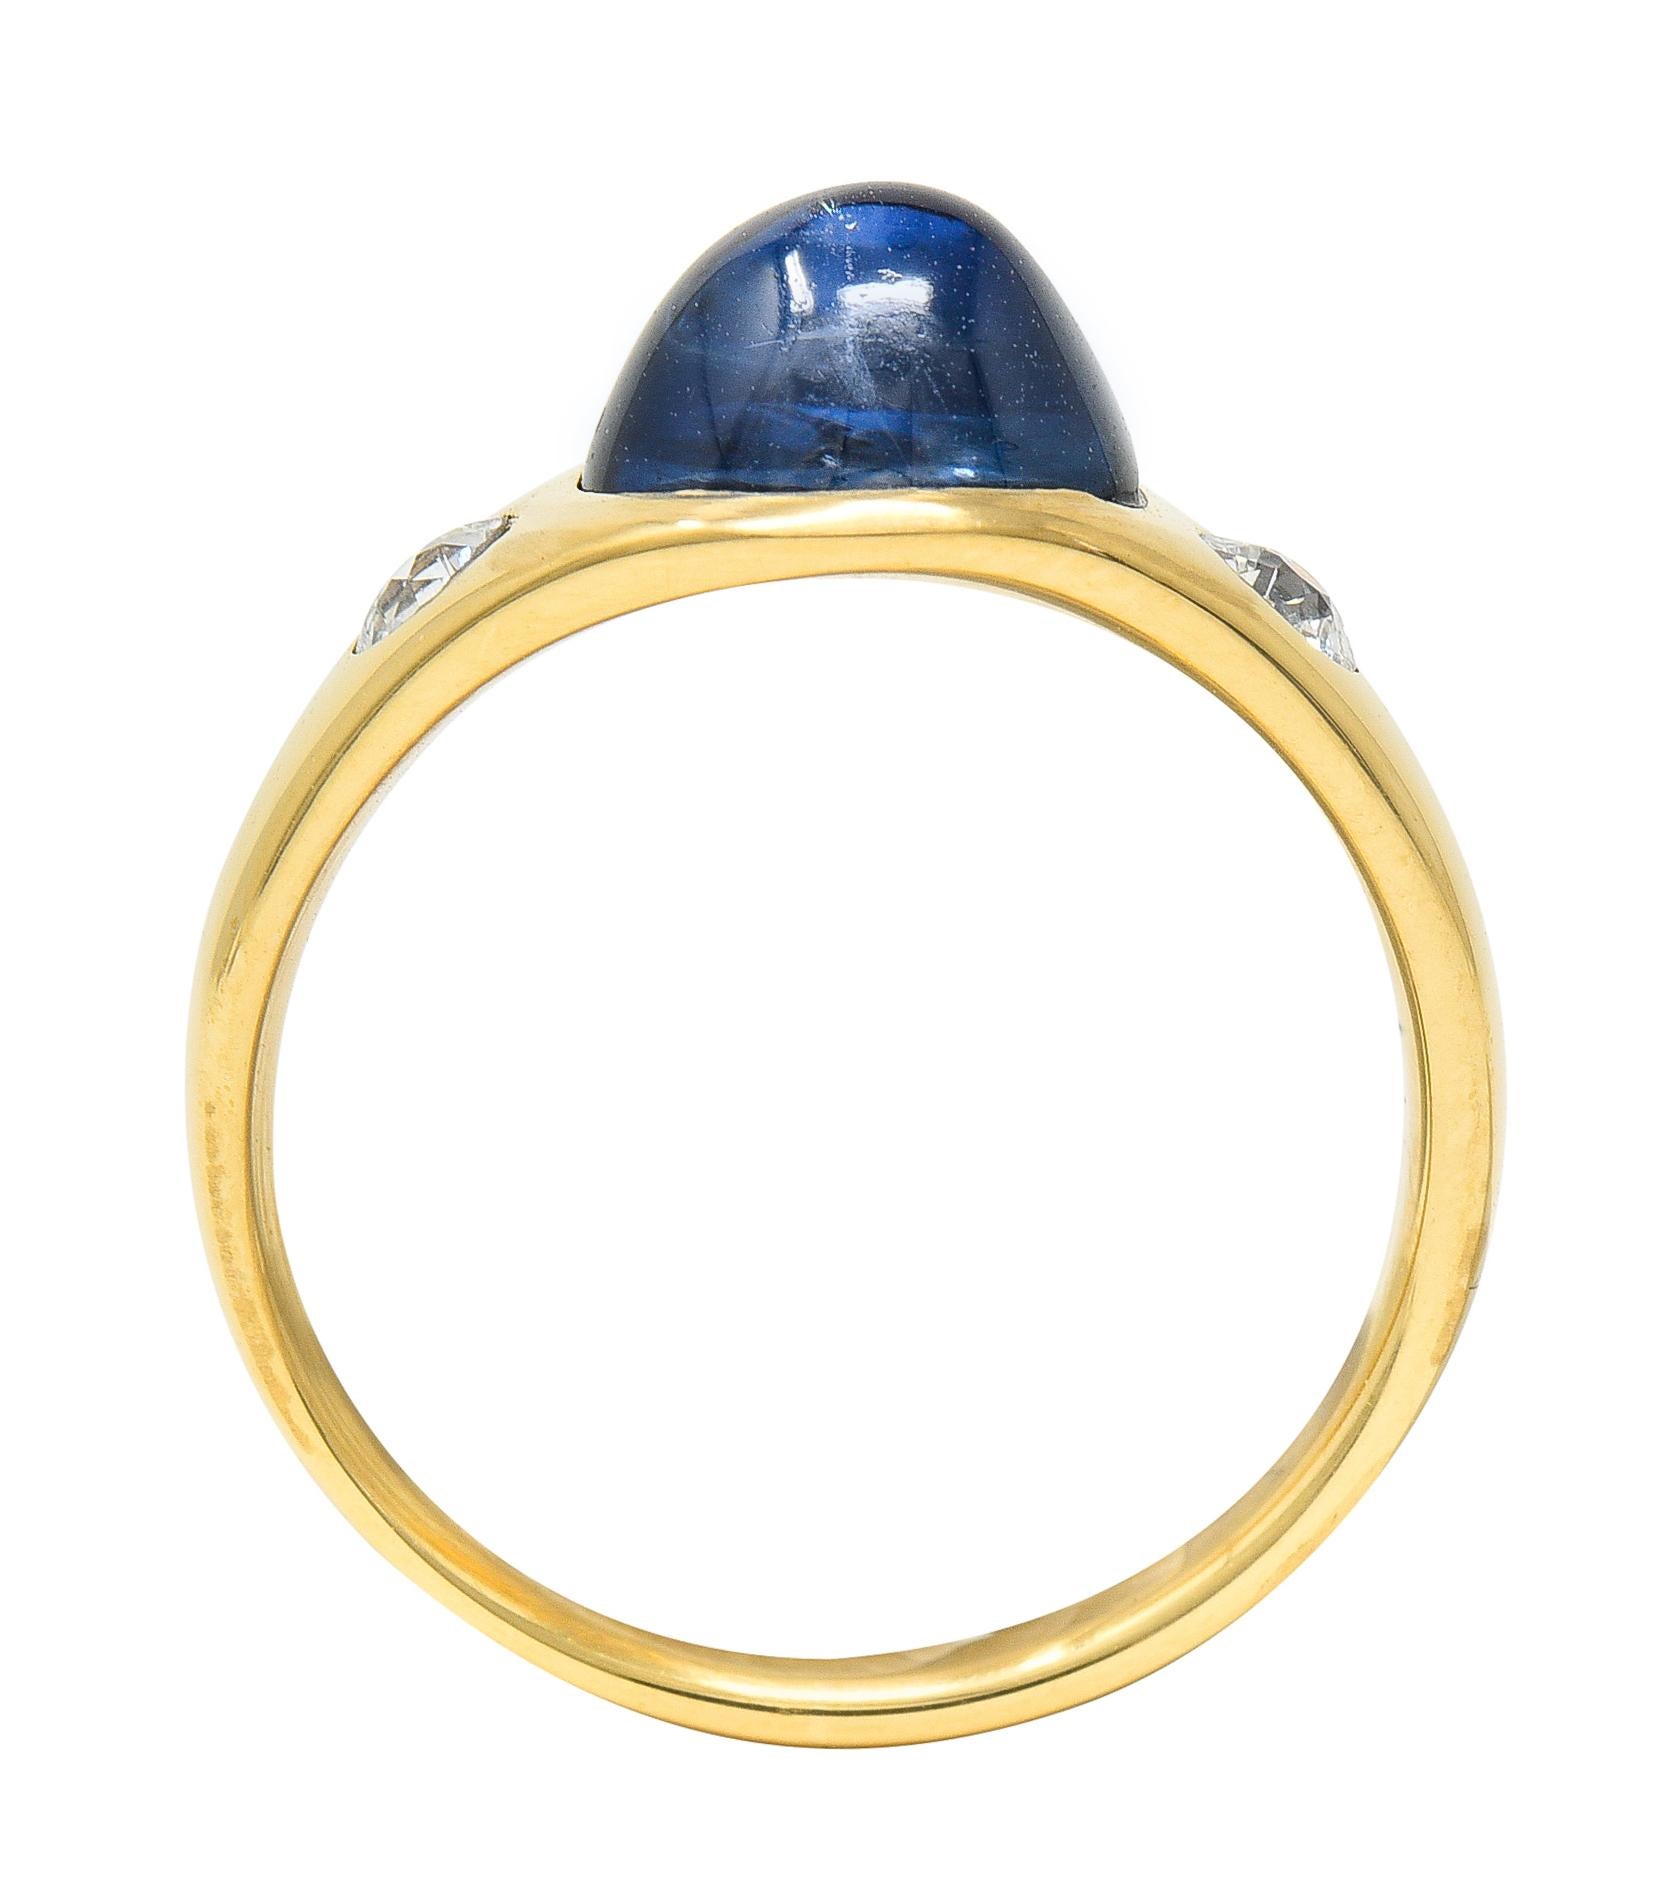 Gypsy band ring features a highly domed Ceylon sapphire cabochon weighing approximately 3.25 carats. Blue in color with no indications of heat - Sri Lankan in origin. Flanked by two flush set old European cut diamonds. Weighing collectively